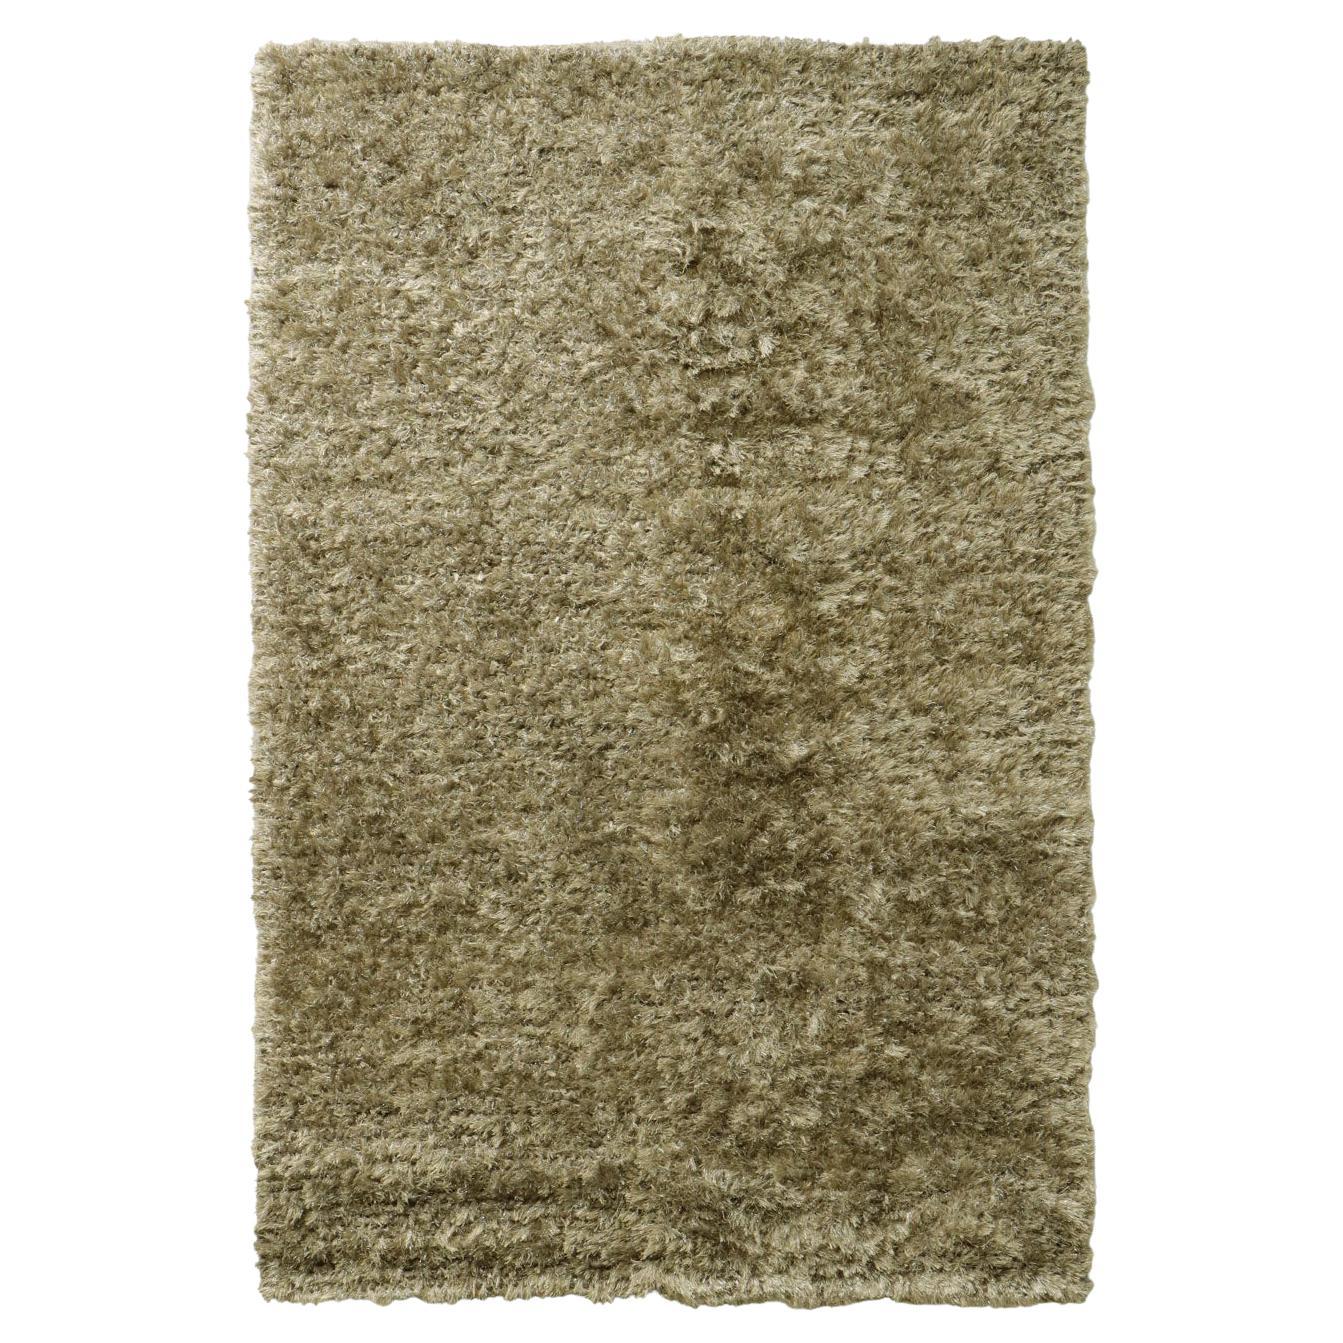 Natural Inspired Luminous Spring Rug by Deanna Comellini In Stock 170x240 cm